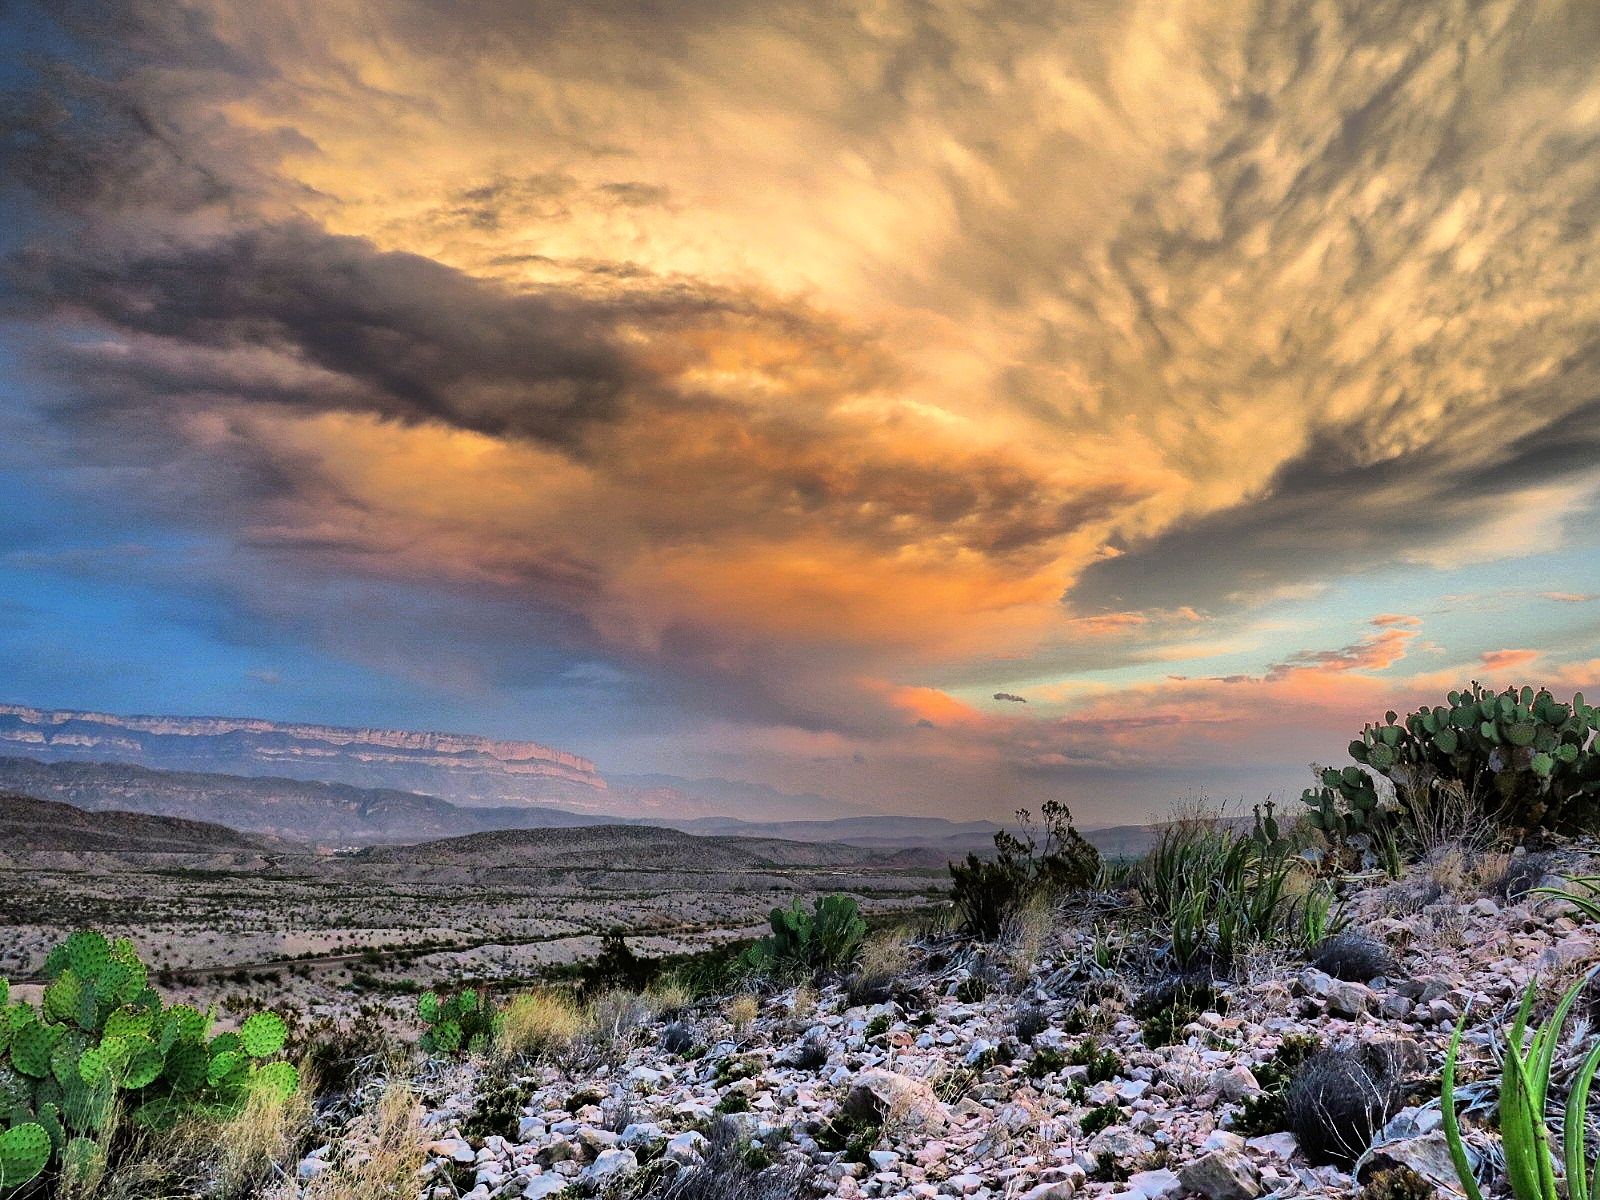 Today S Sunset In Big Bend National Park Texas HD Wallpaper From